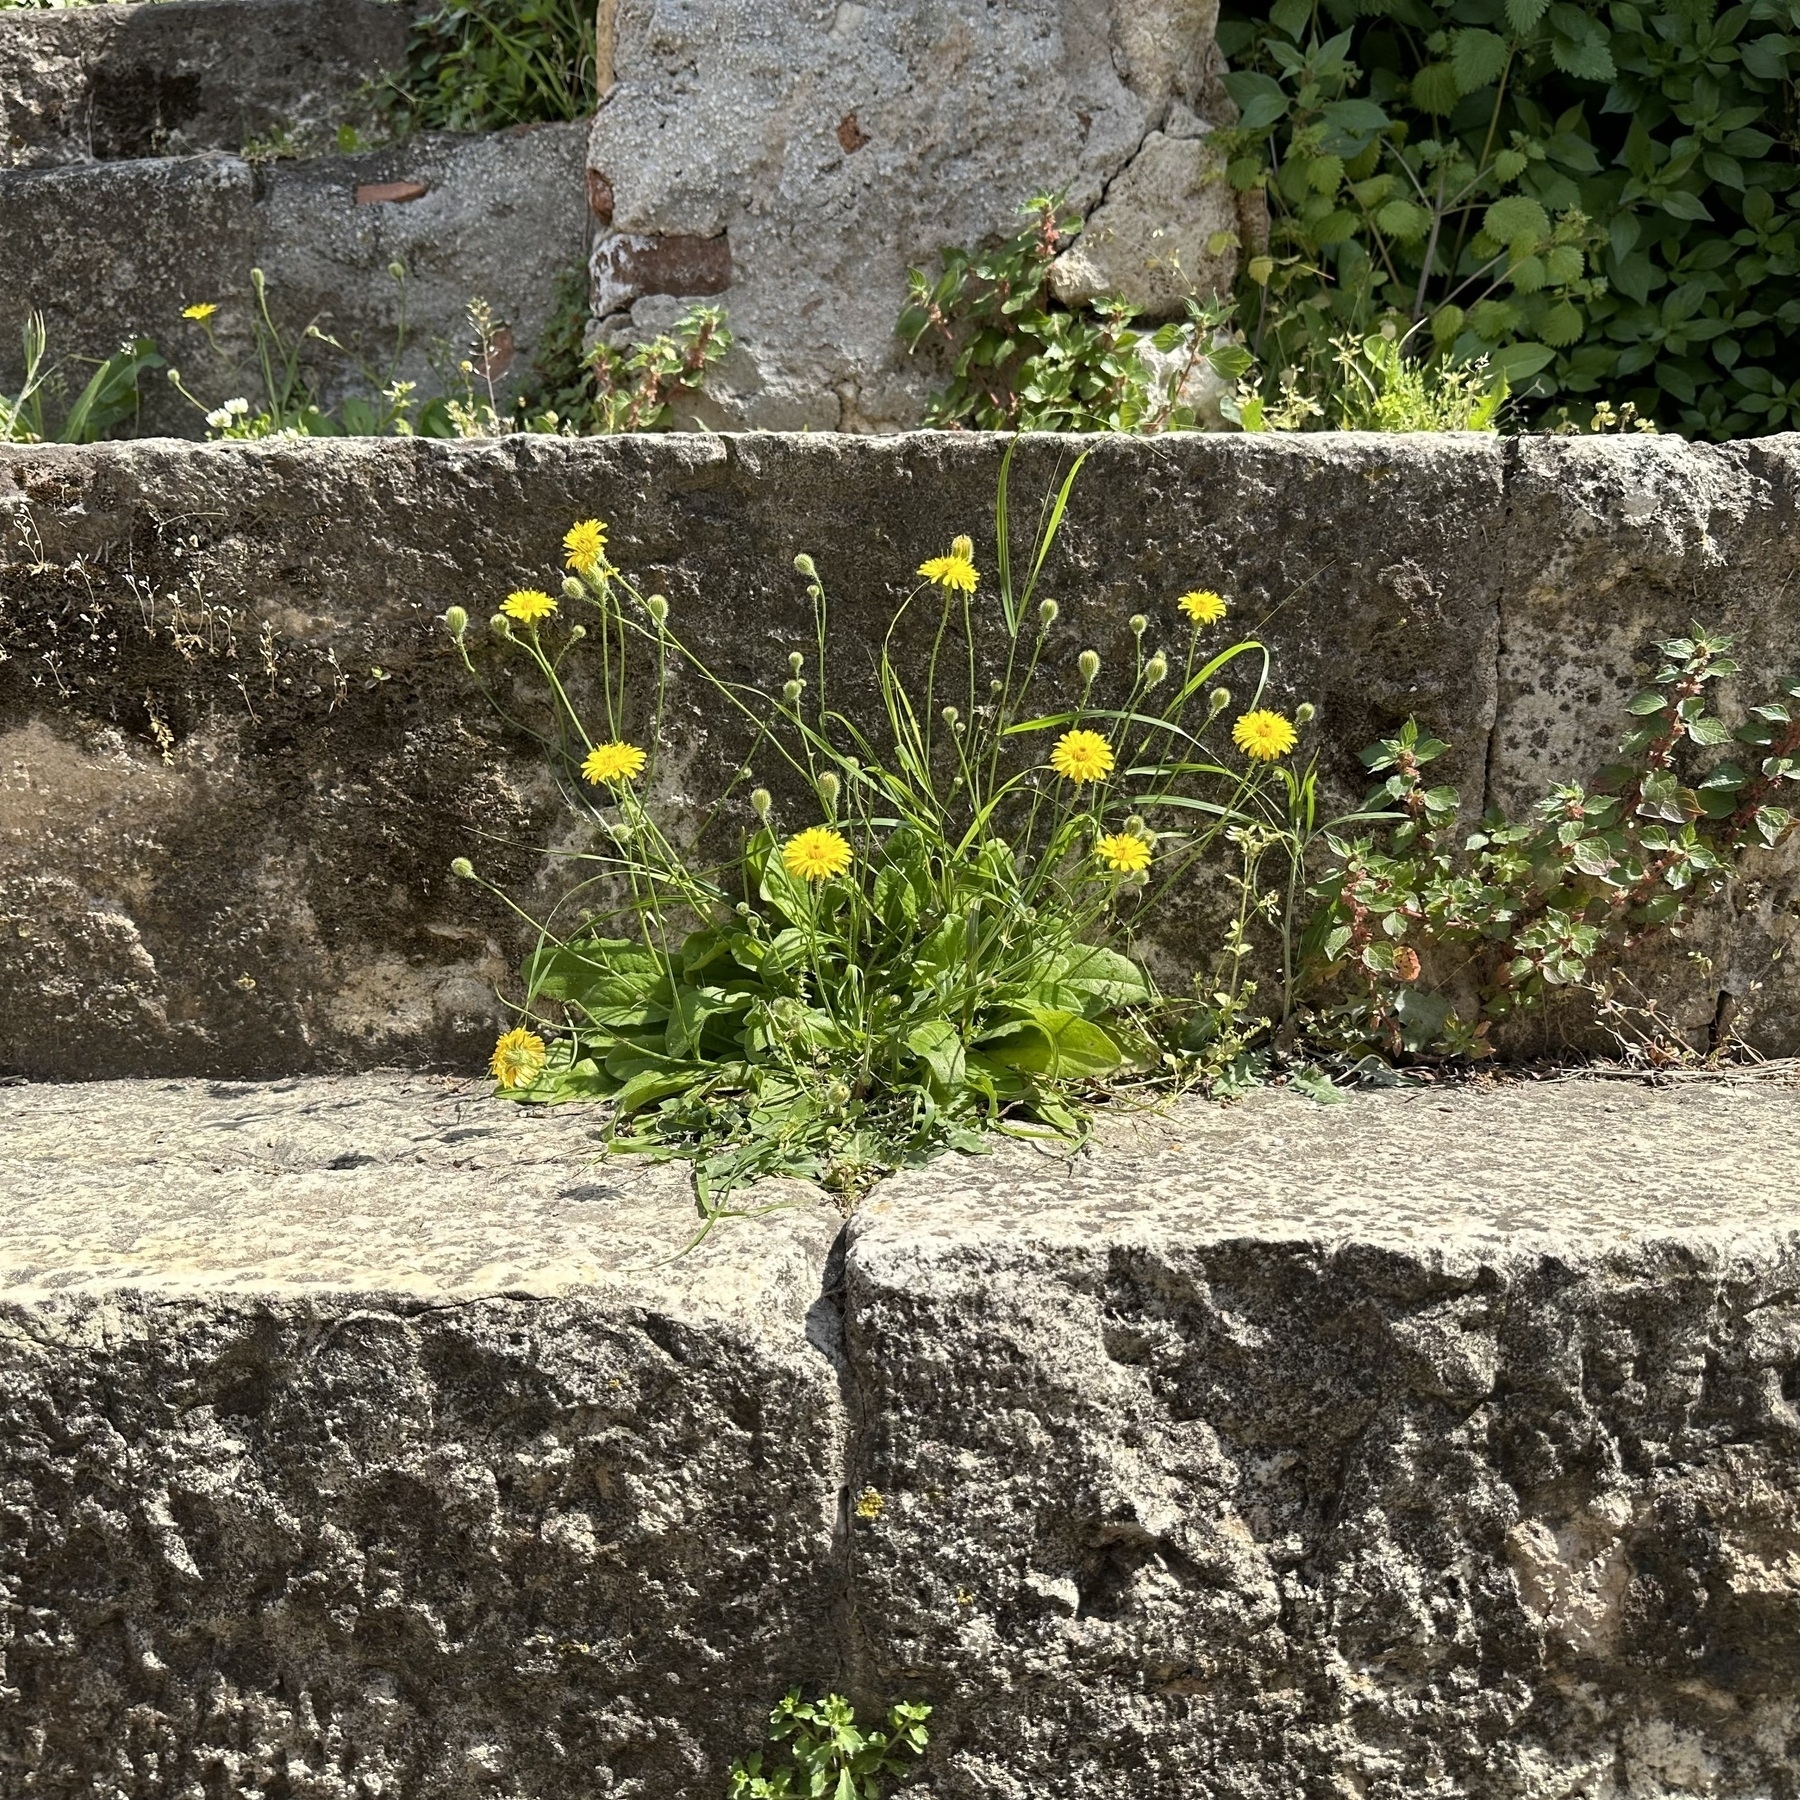 Flatweed growing out of the gap between stones in a set of stone steps.